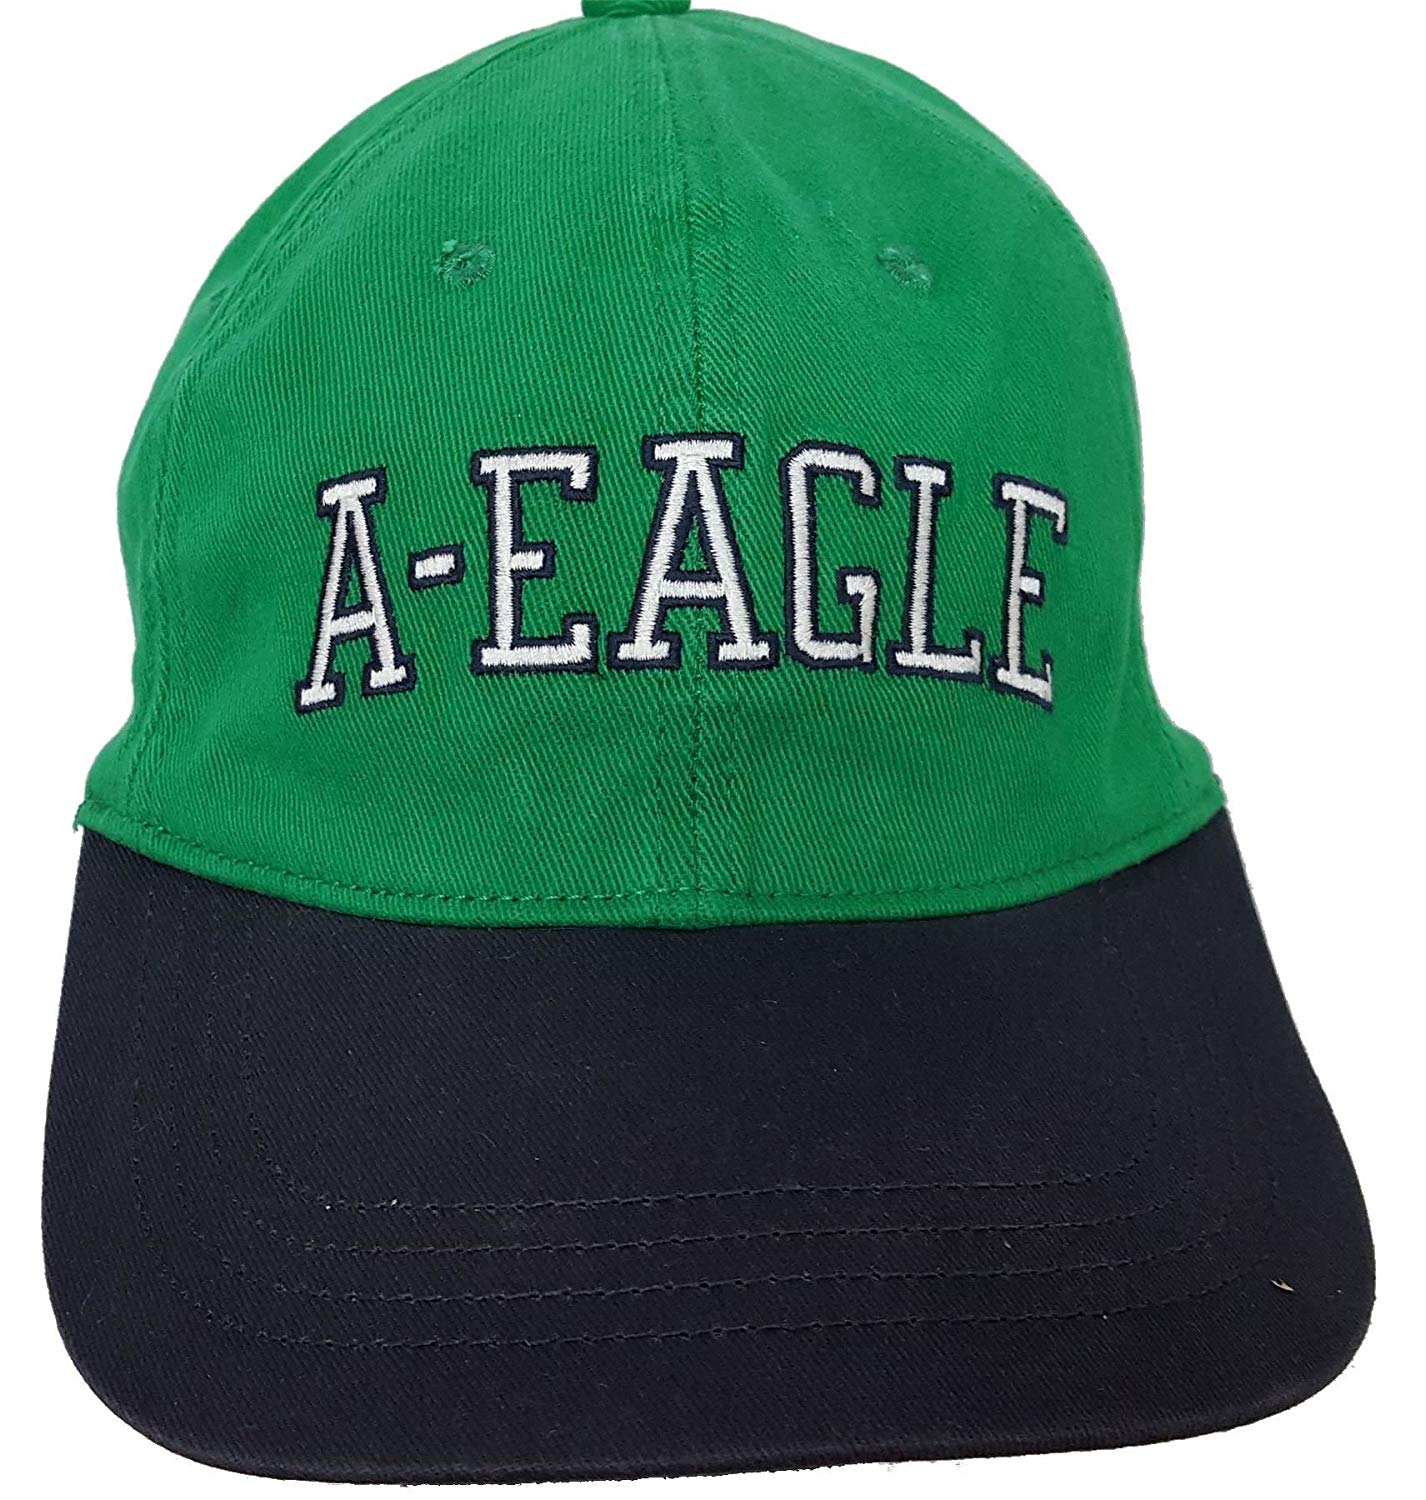 Green w Logo - American Eagle Outfitters Green w/ White A-EAGLE Logo Navy Bill ...